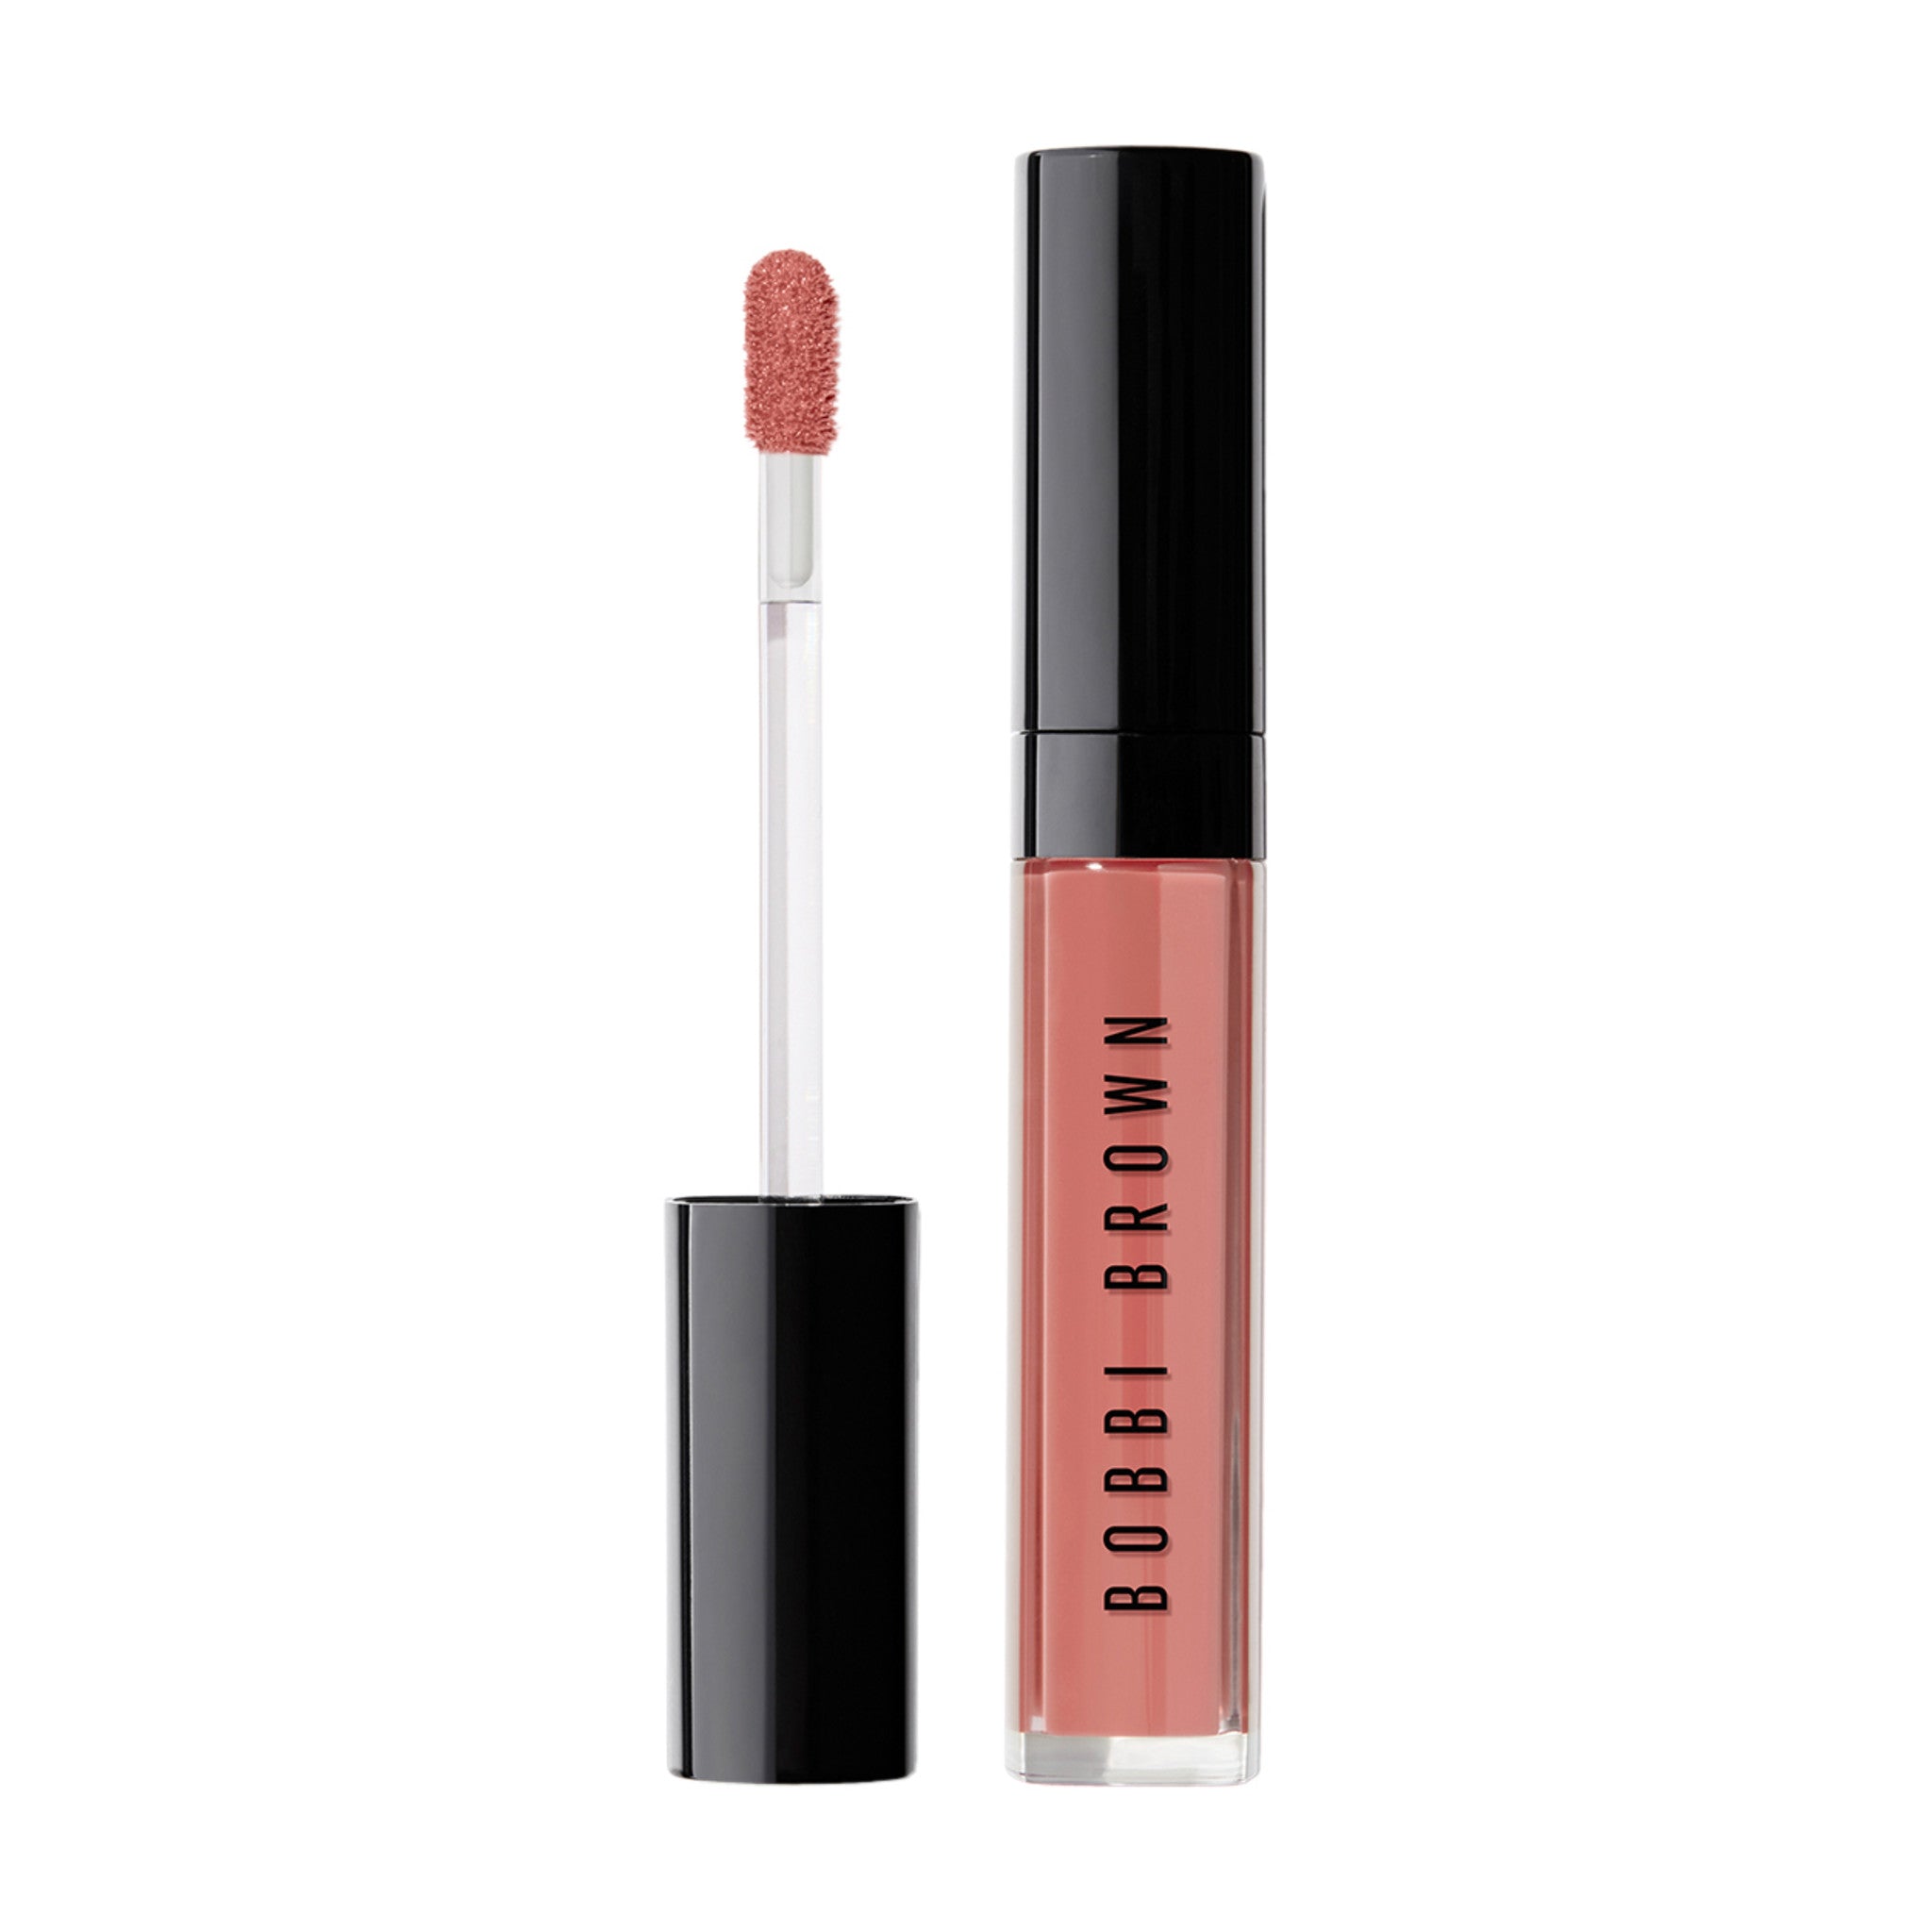 Bobbi Brown Crushed Oil Infused Gloss - in The Buff